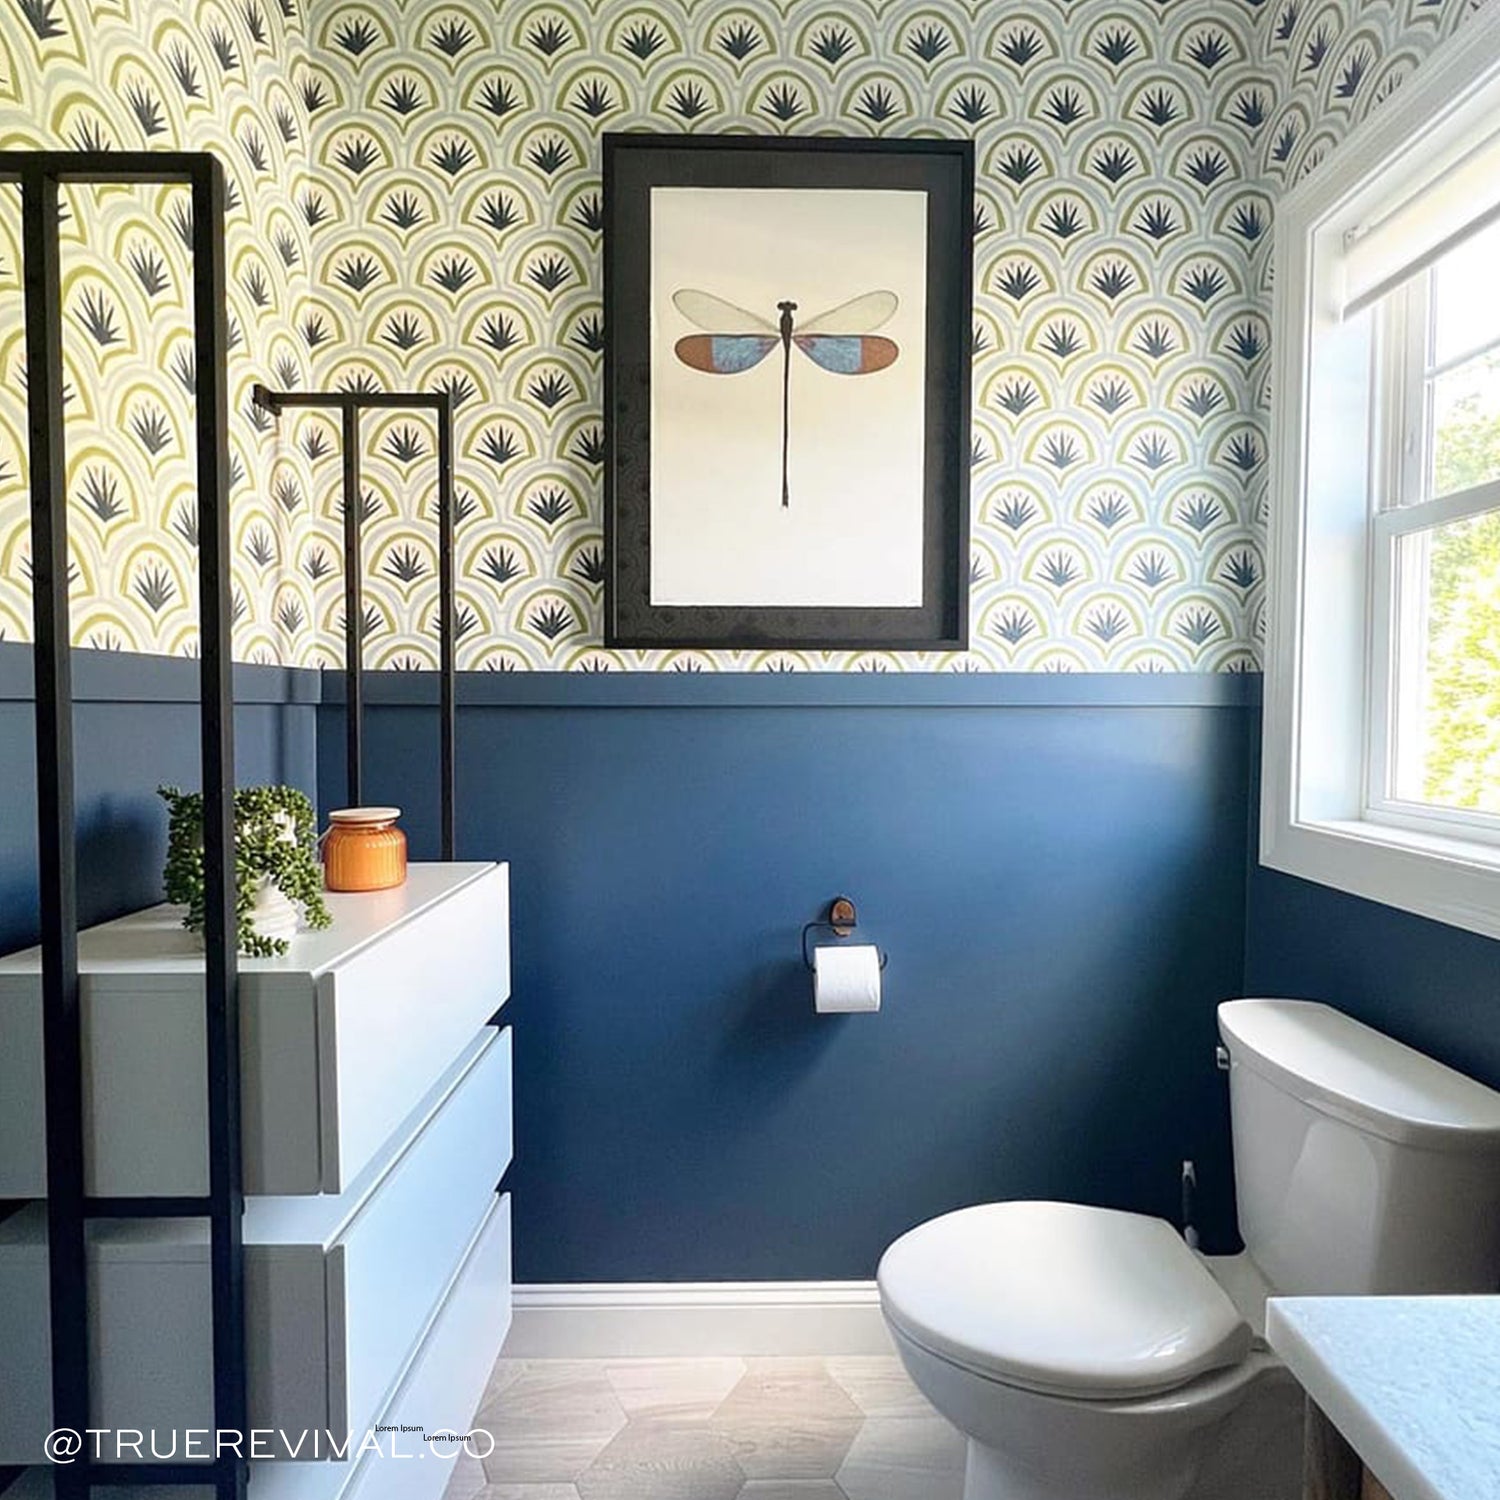 Bathroom styled with Art Deco Palm Pattern Printed Wallpaper in front of white toilet under window in front of white drawers. Photo taken by True Revival Co